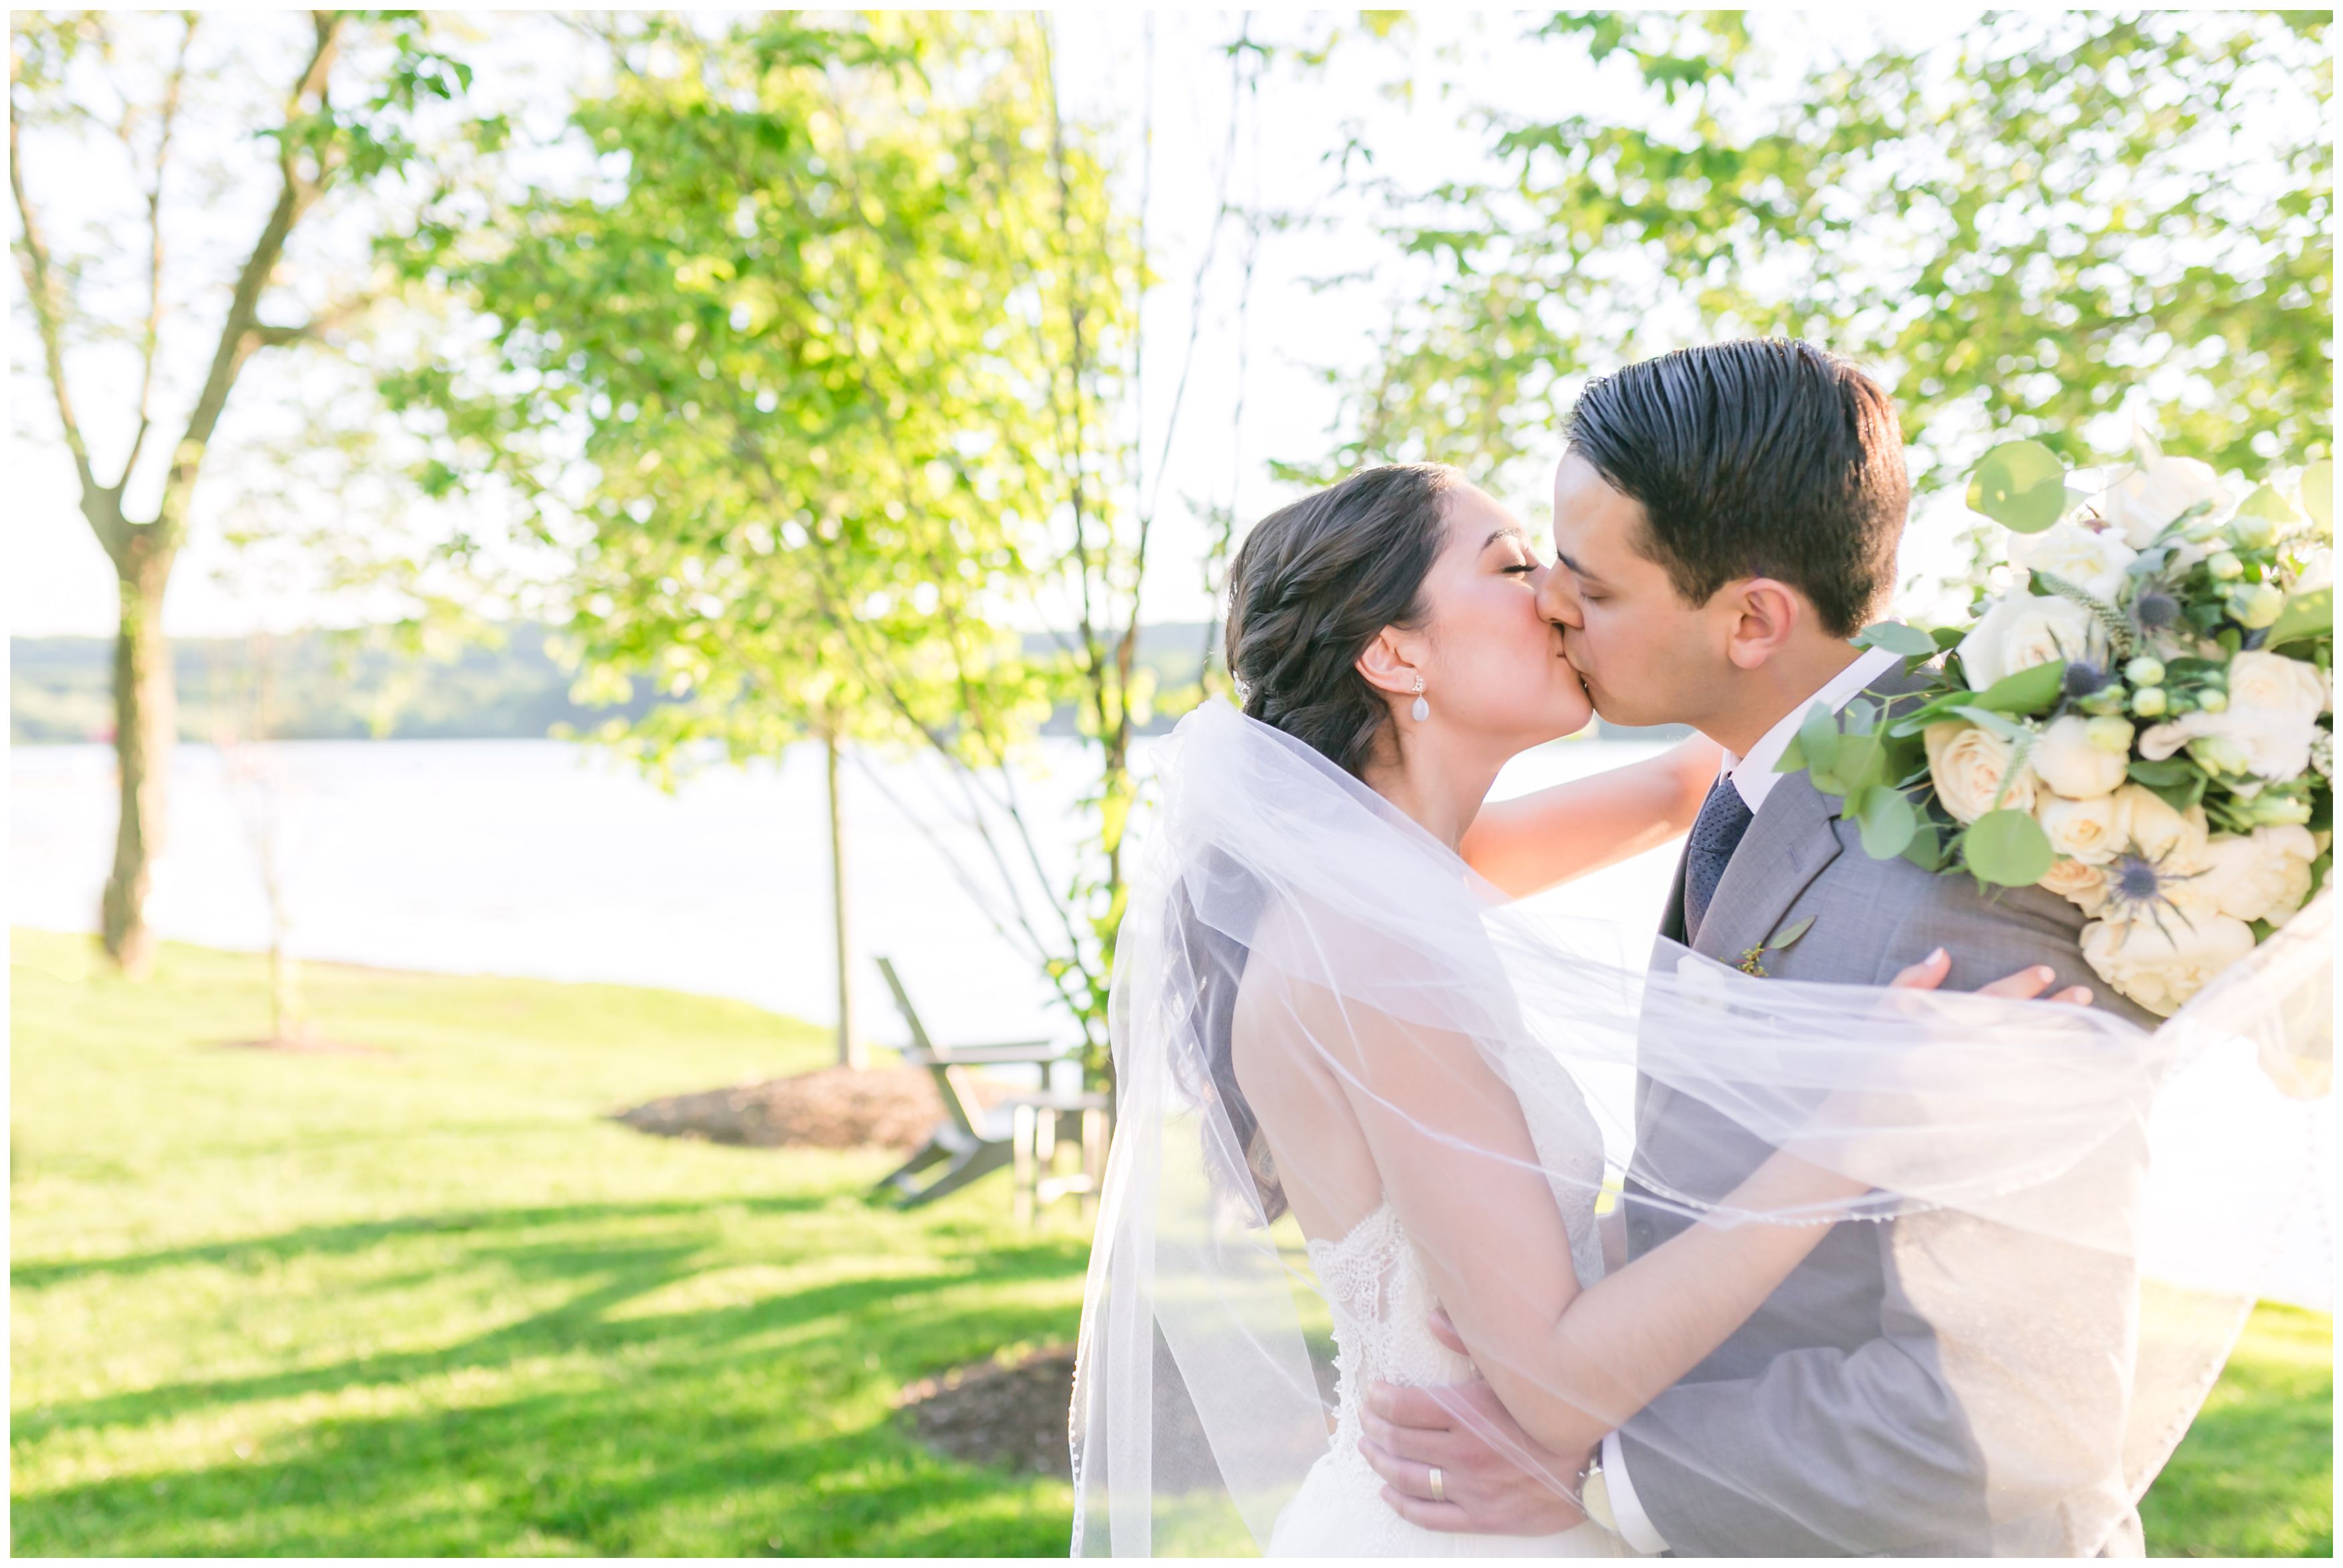 Classic bride and groom wedding portrait kissing at outdoor summer lakeside wedding at the Indian Trail Club